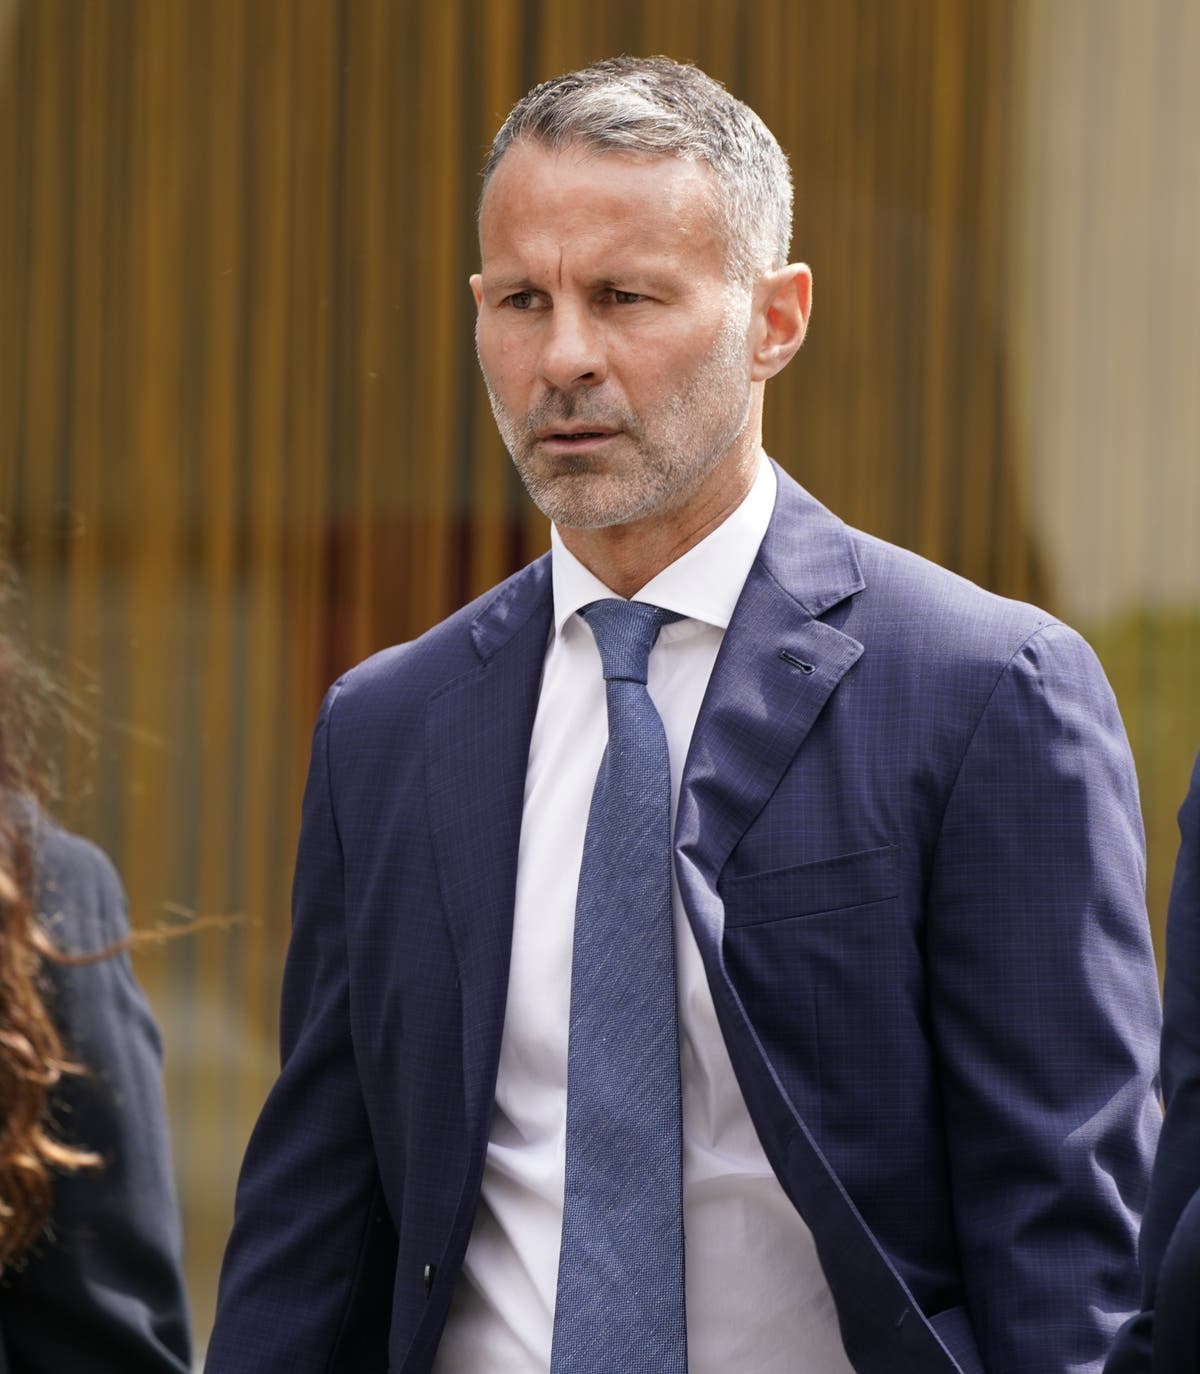 Ryan Giggs ‘kicked ex in back and threw her naked out of hotel room’, court told